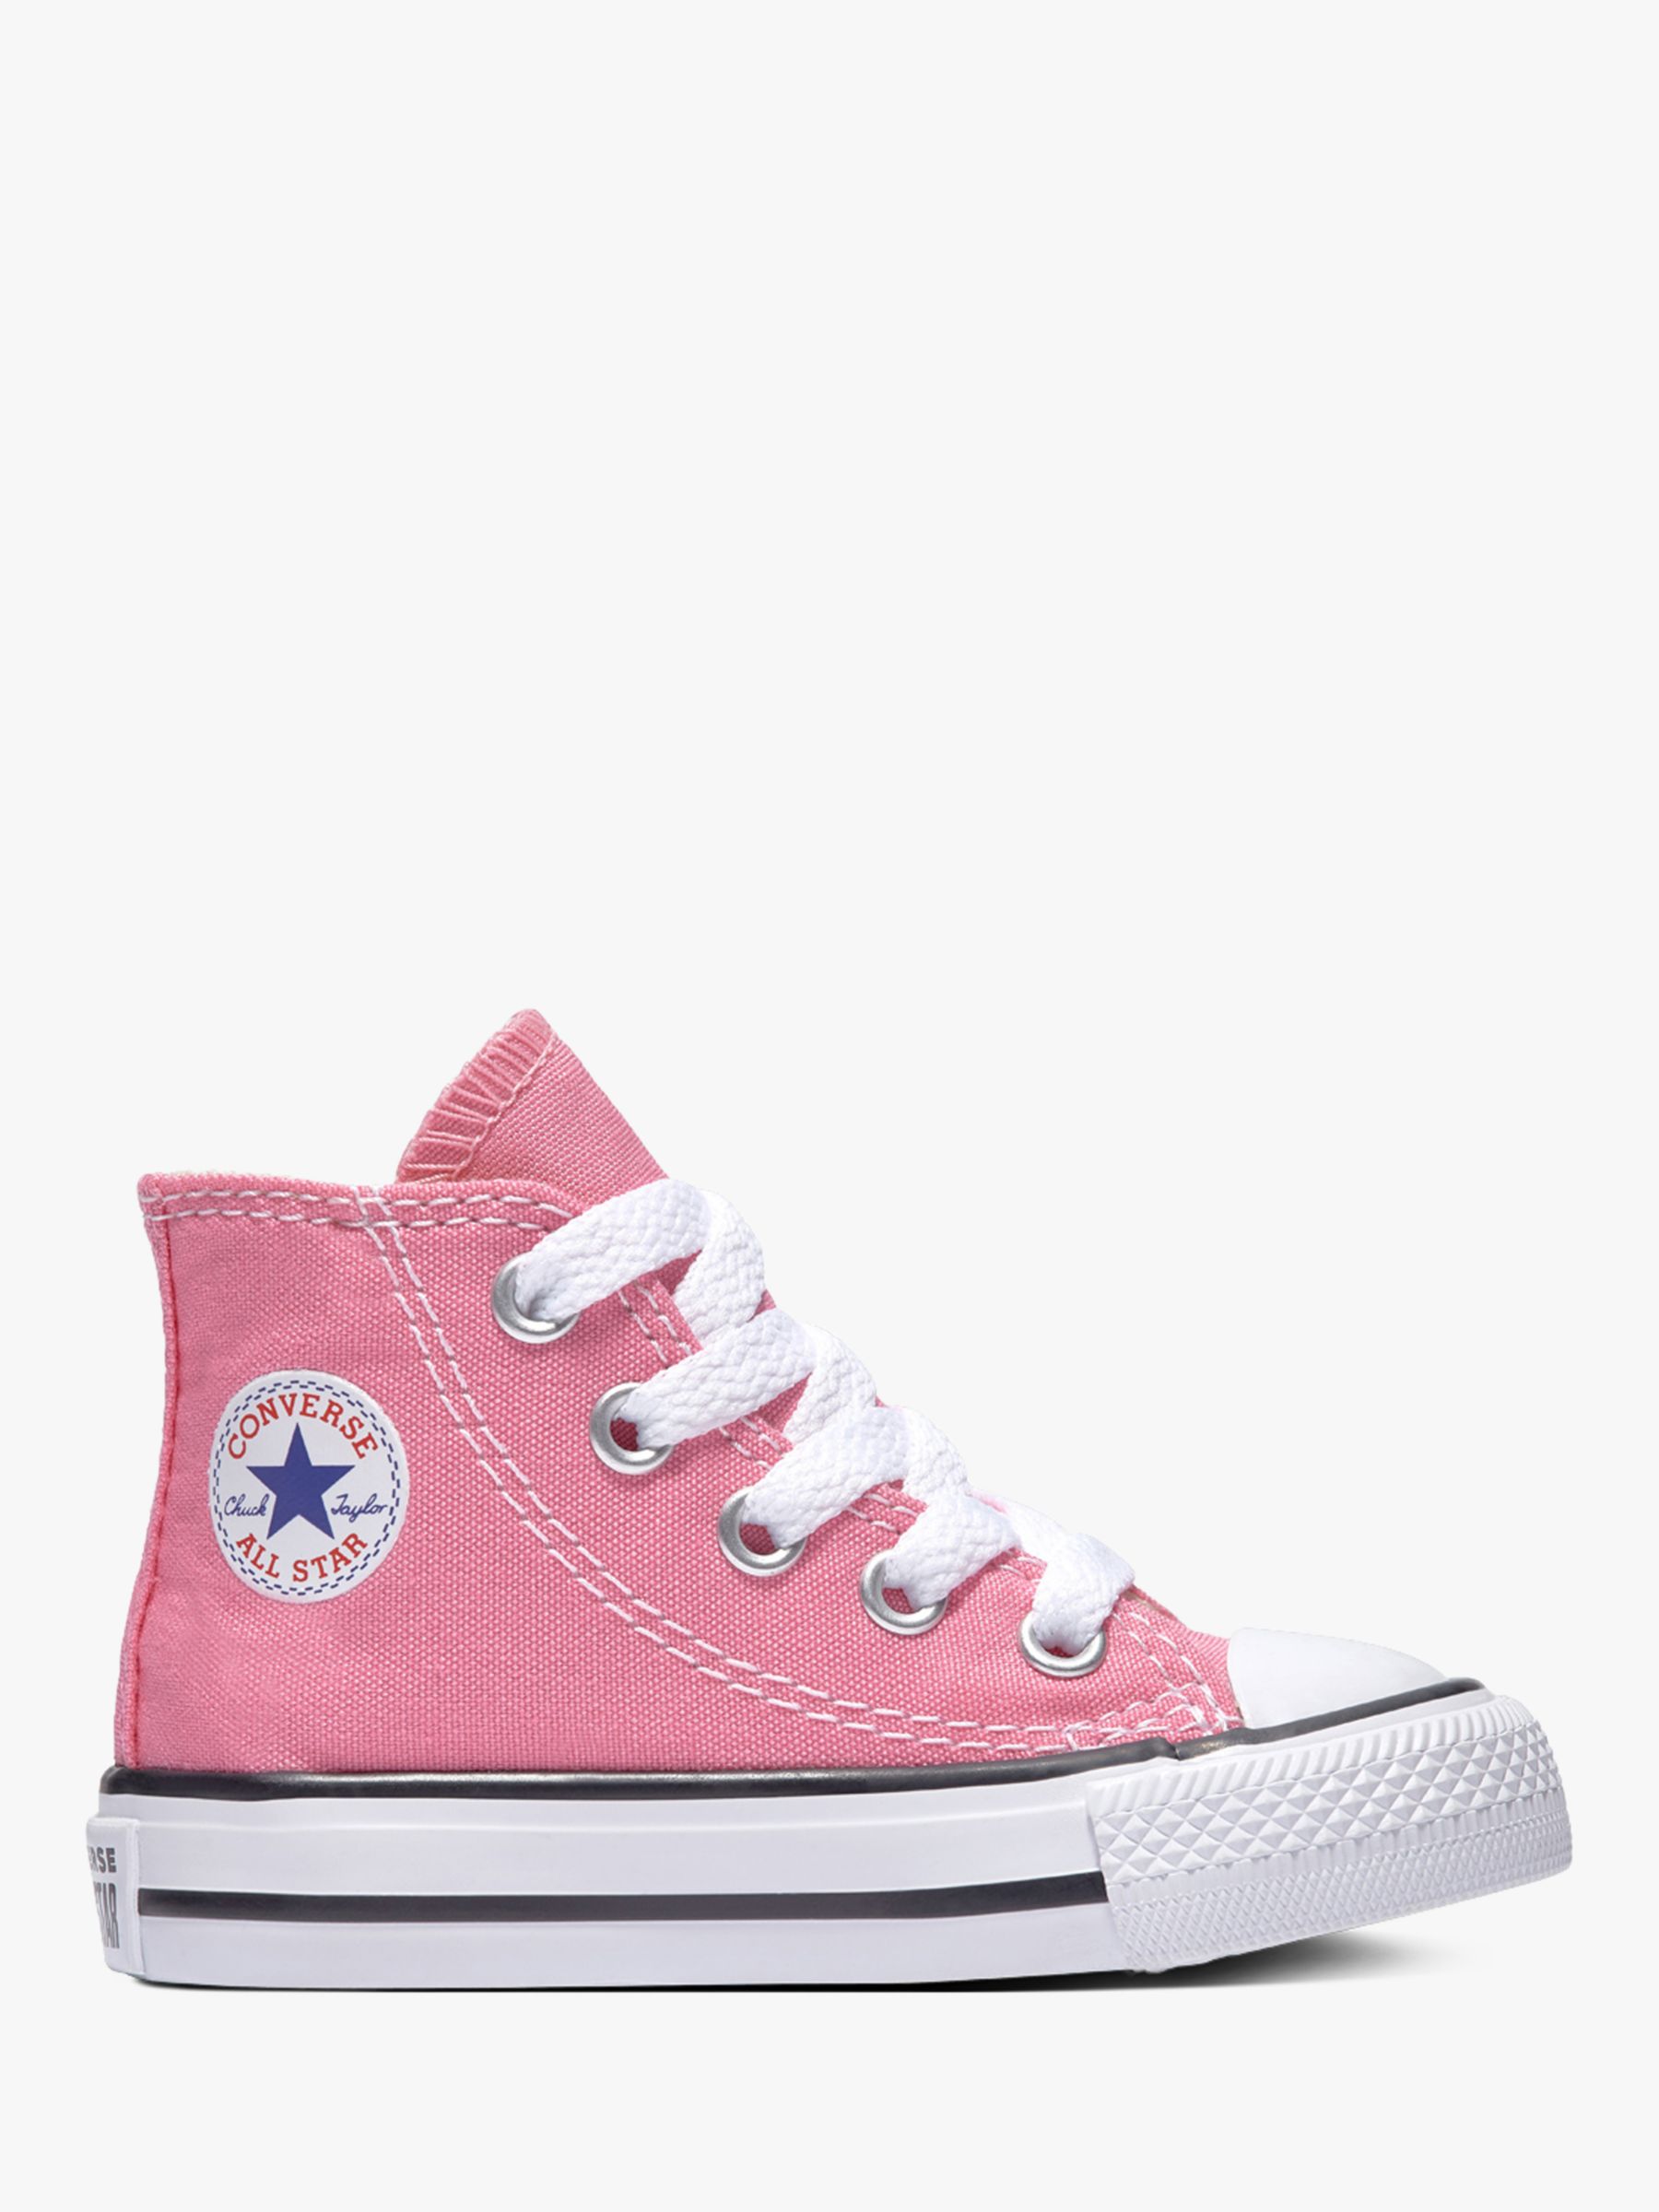 Converse Kids' Chuck Taylor All Star Core Hi-Top Trainers